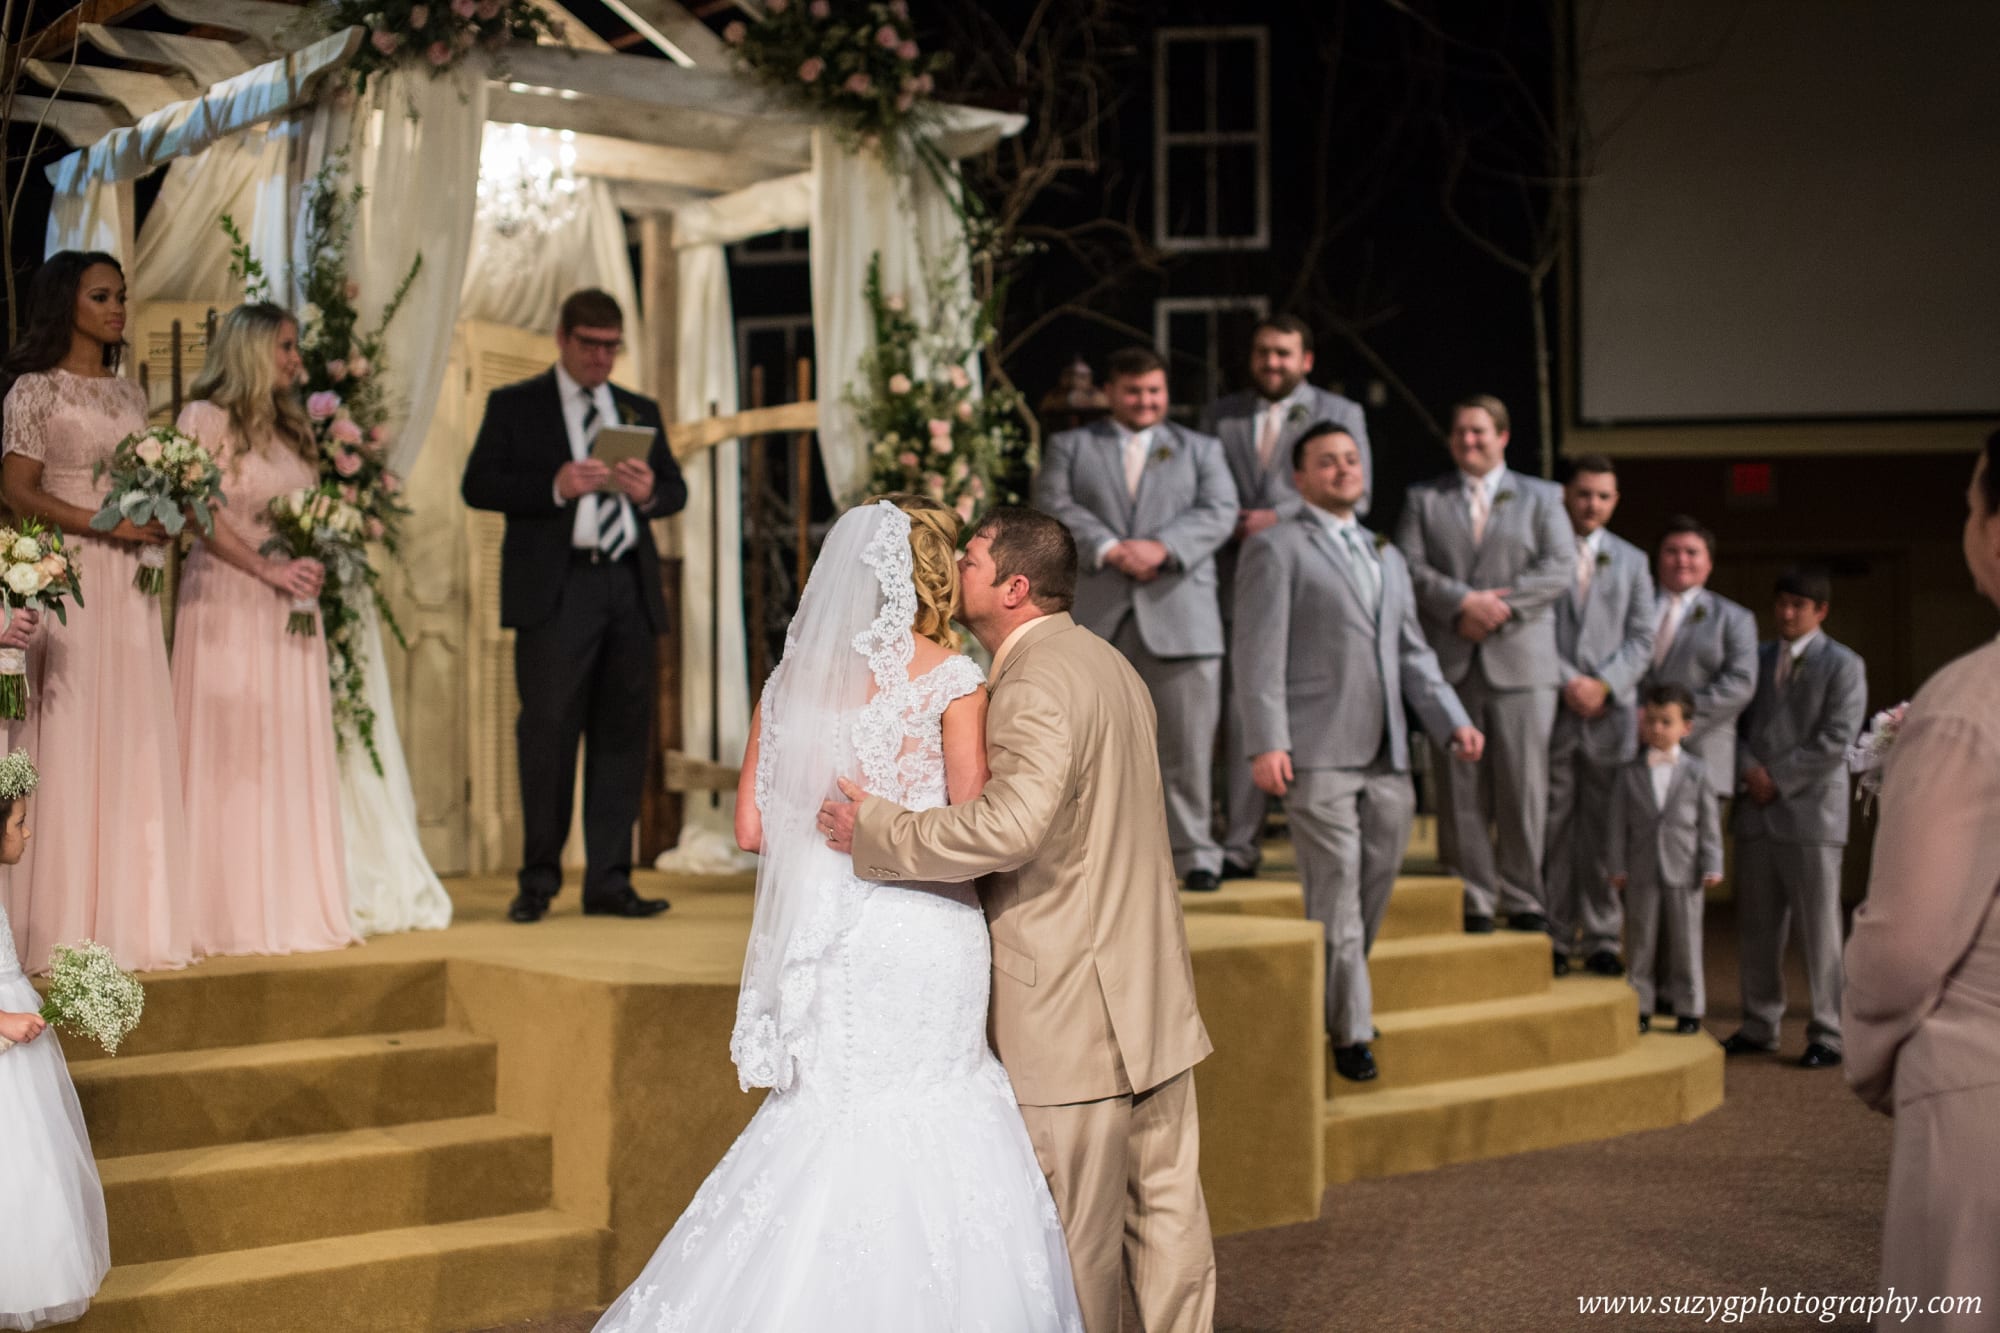 vows by victoria-lake charles-wedding-photography-suzy g-photography-suzygphotography_0041